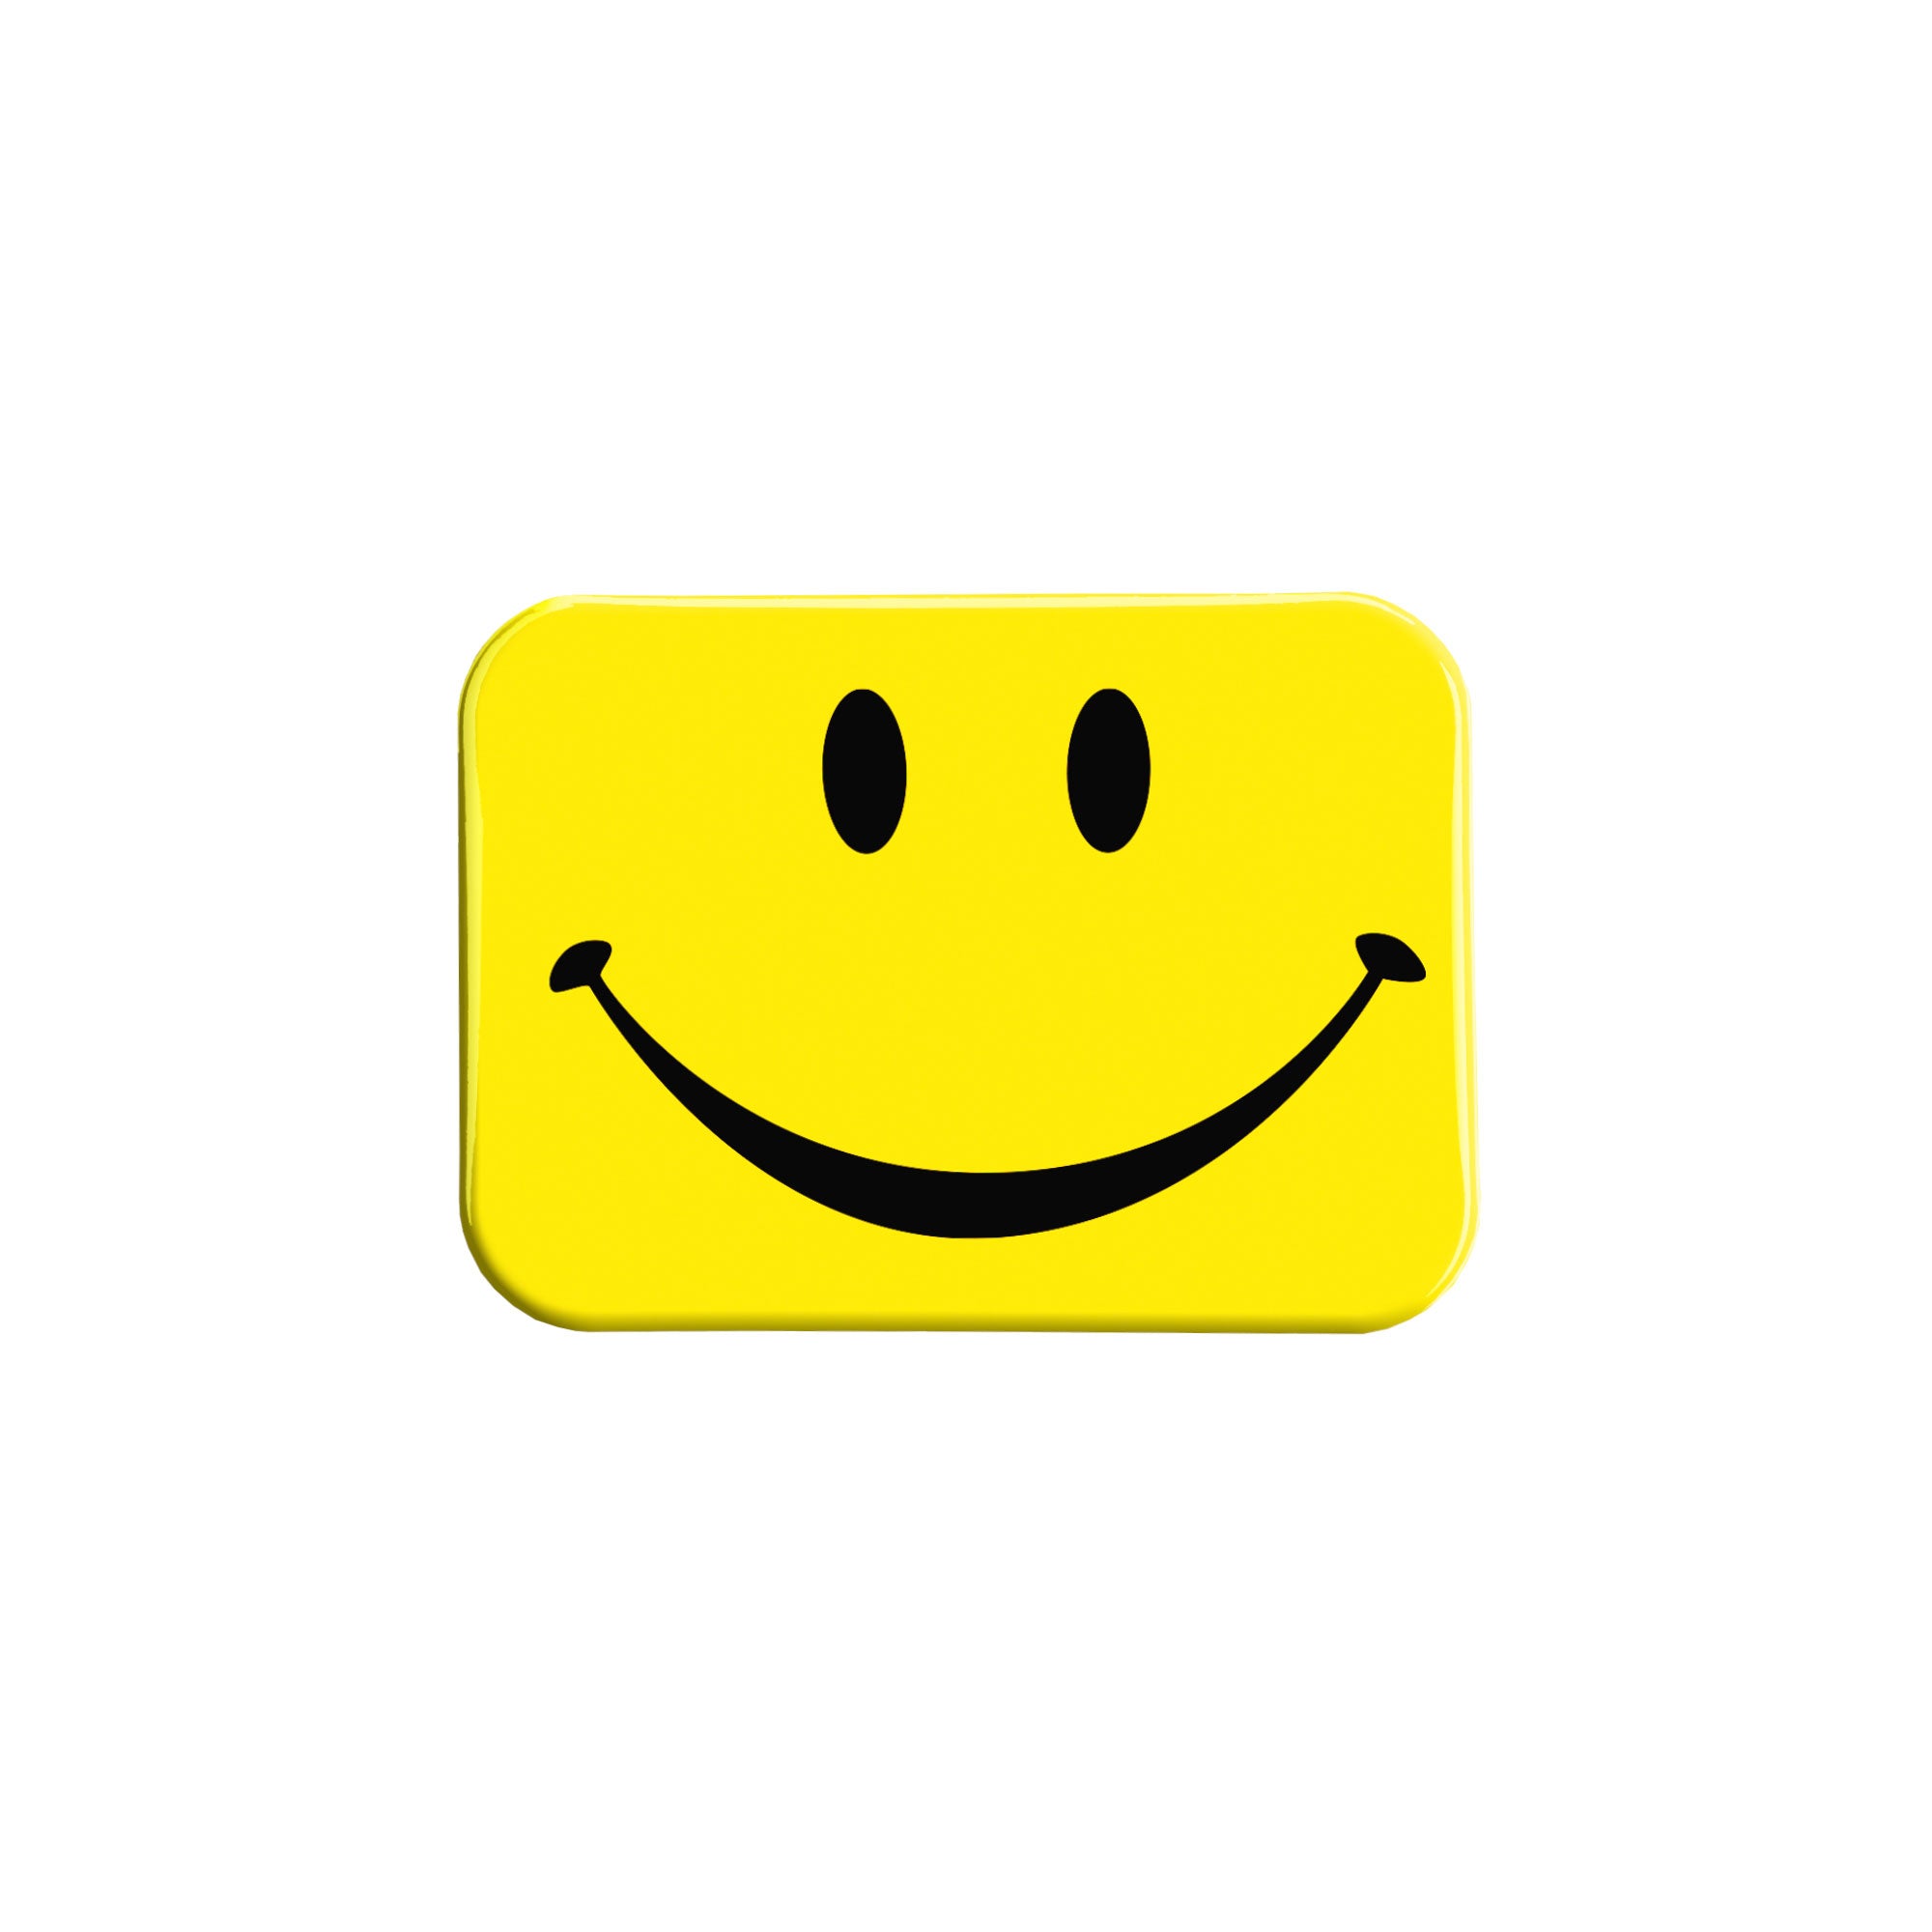 "Yellow Smiley Face" - 2.5" X 3.5" Rectangle Fridge Magnets